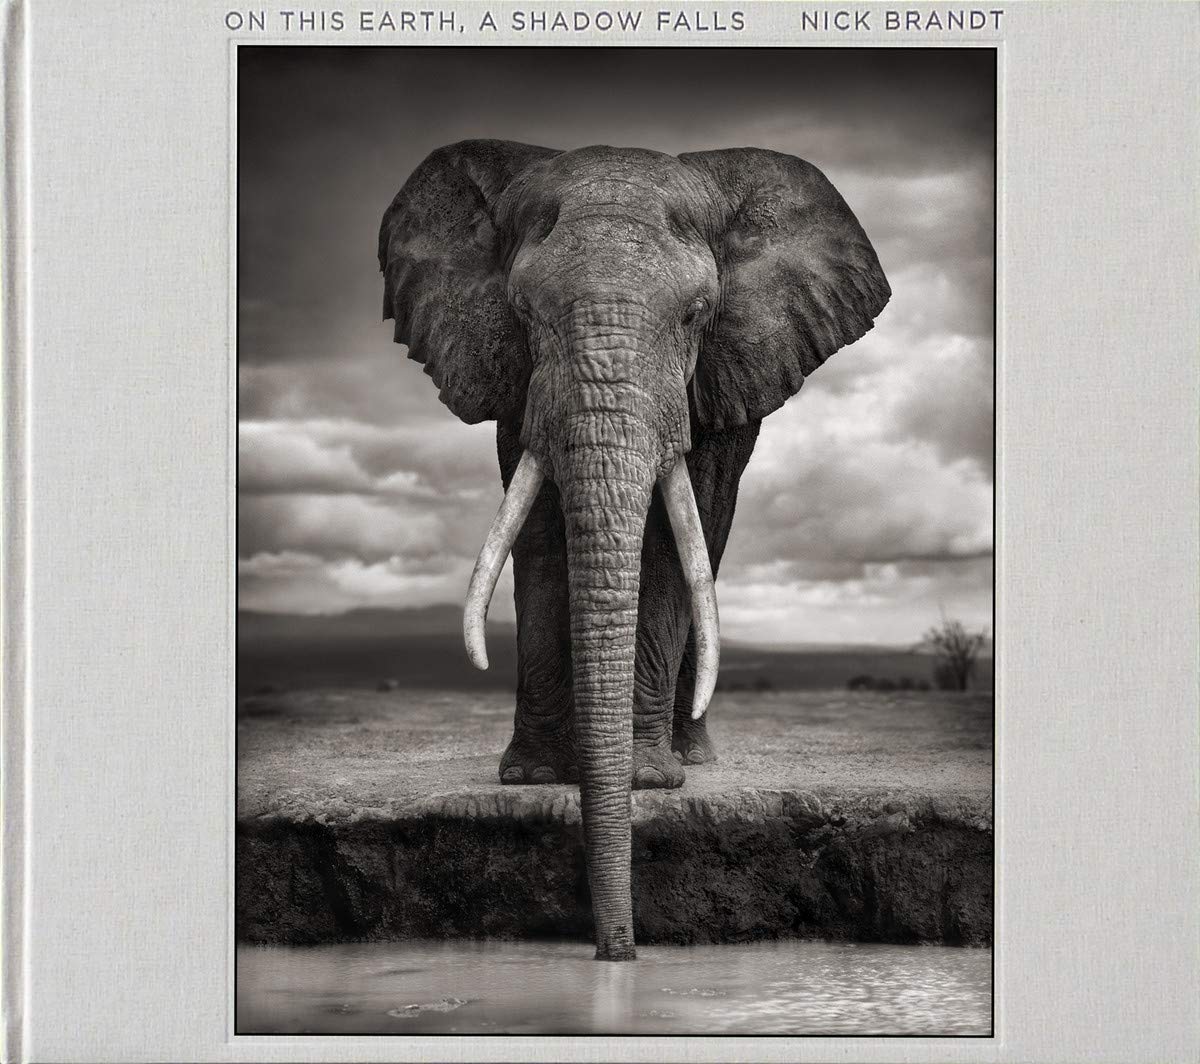 Nick Brandt: On This Earth, A Shadow Falls